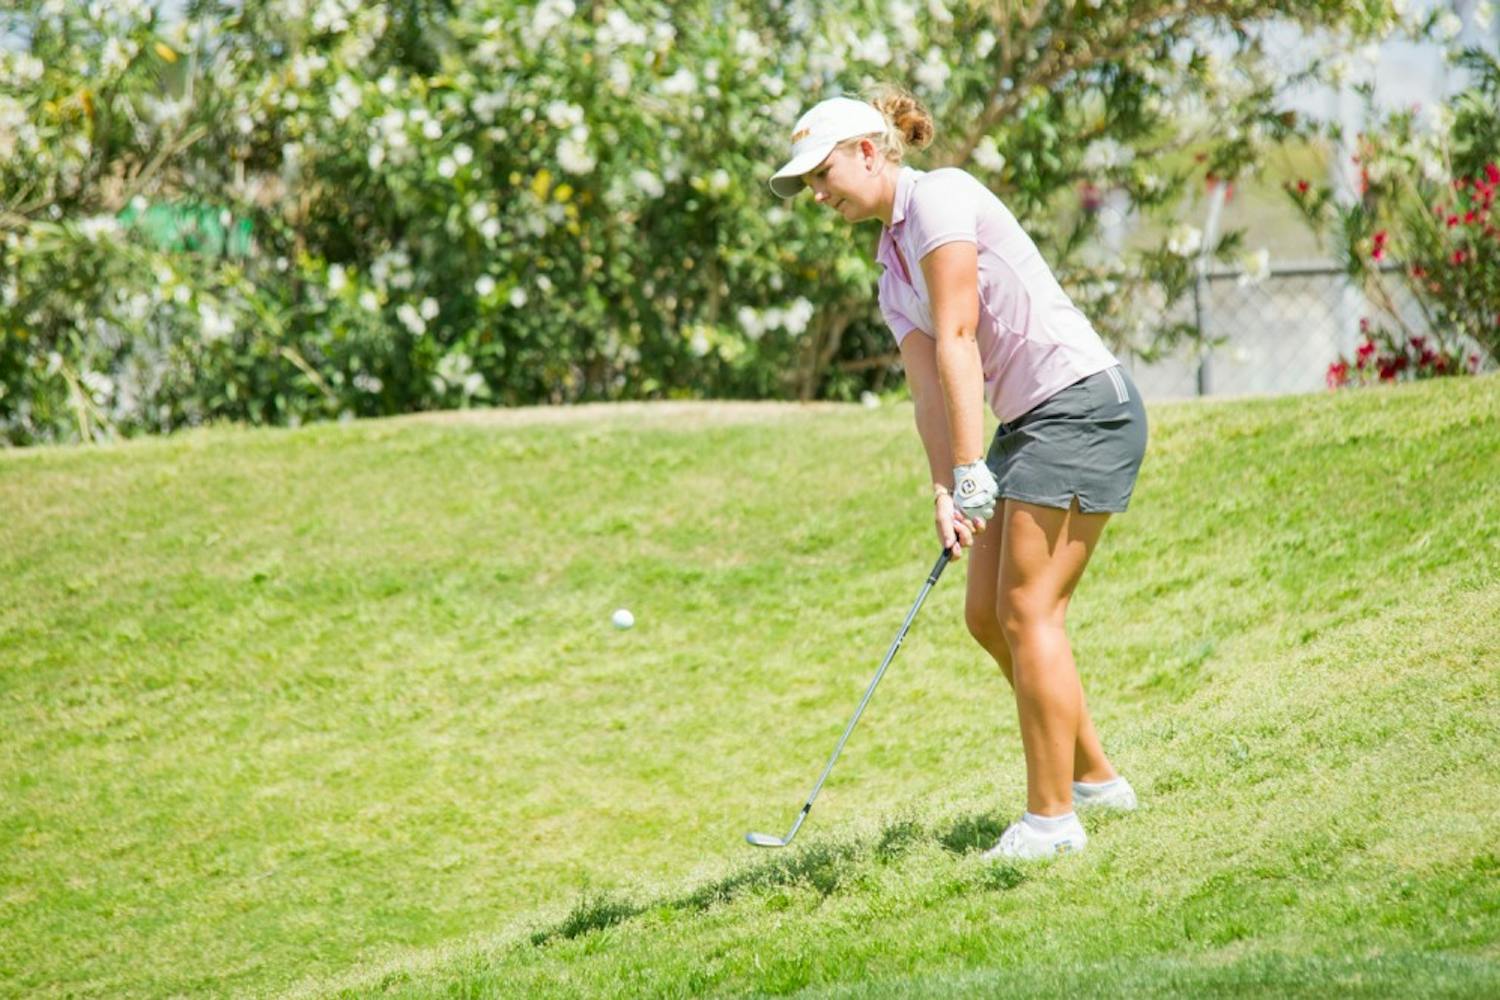 Then-freshman Linnea Strom chips her ball out of the rough on the fifth hole Friday, April 8, 2016 during the 2016 Ping ASU Invitational at Karsten Golf Course in Tempe, Arizona.